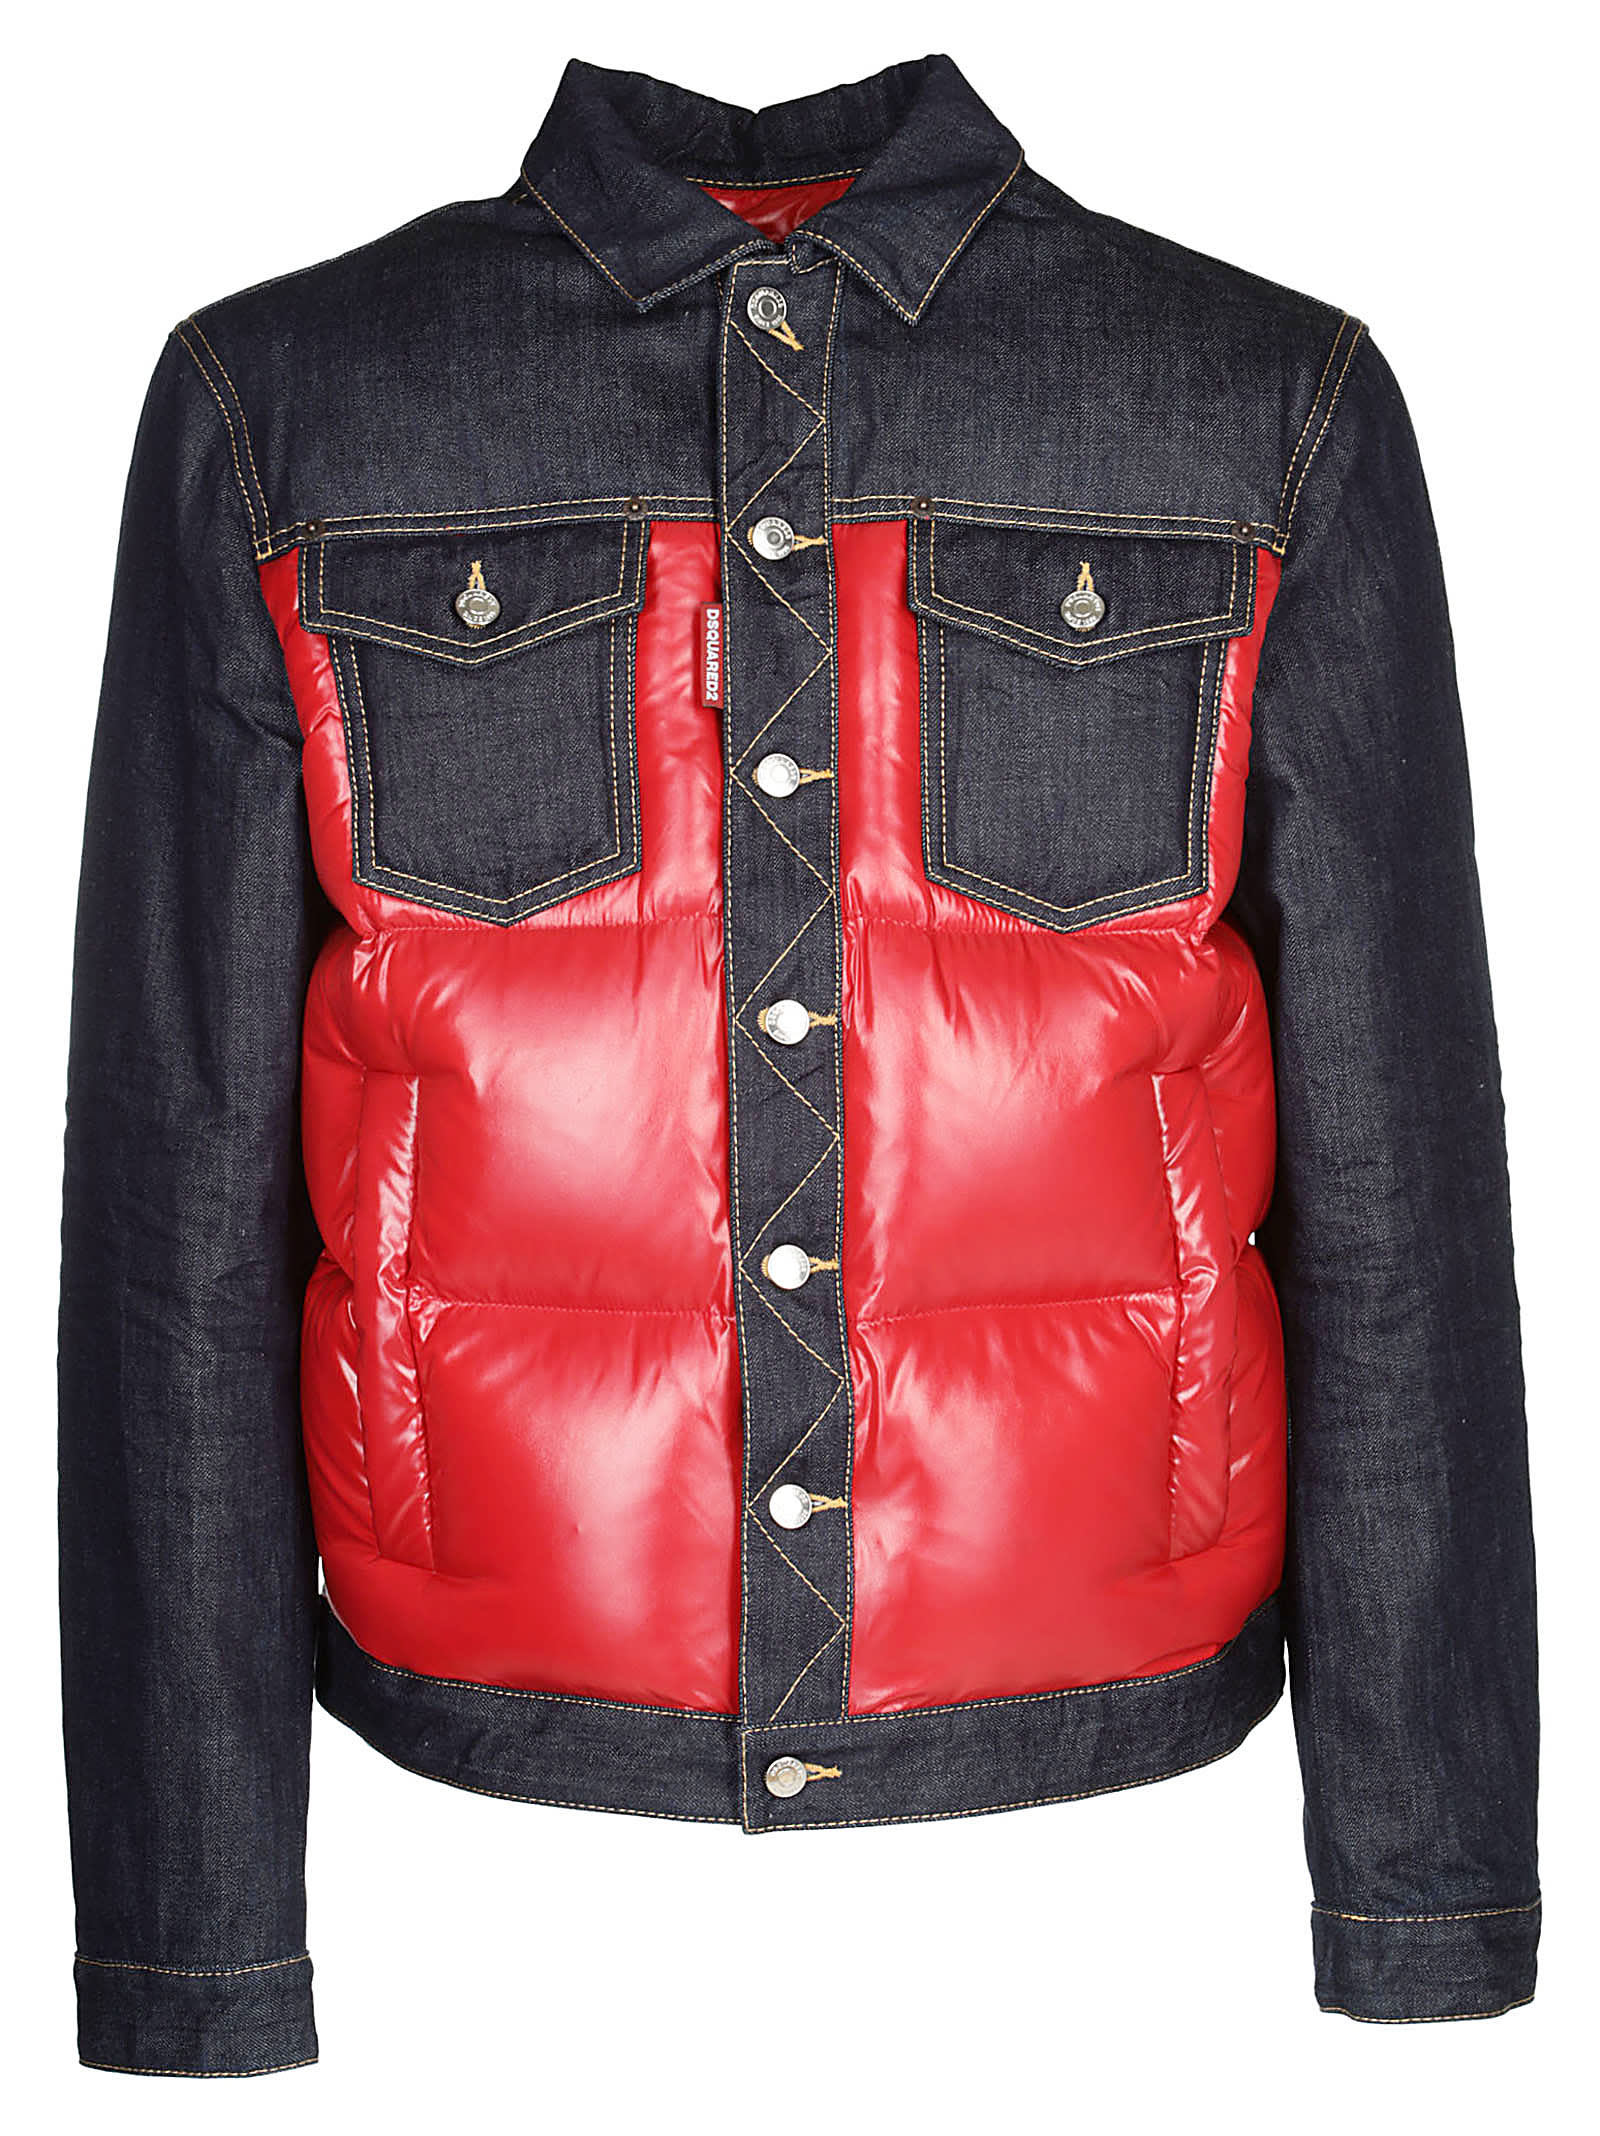 dsquared2 red jacket